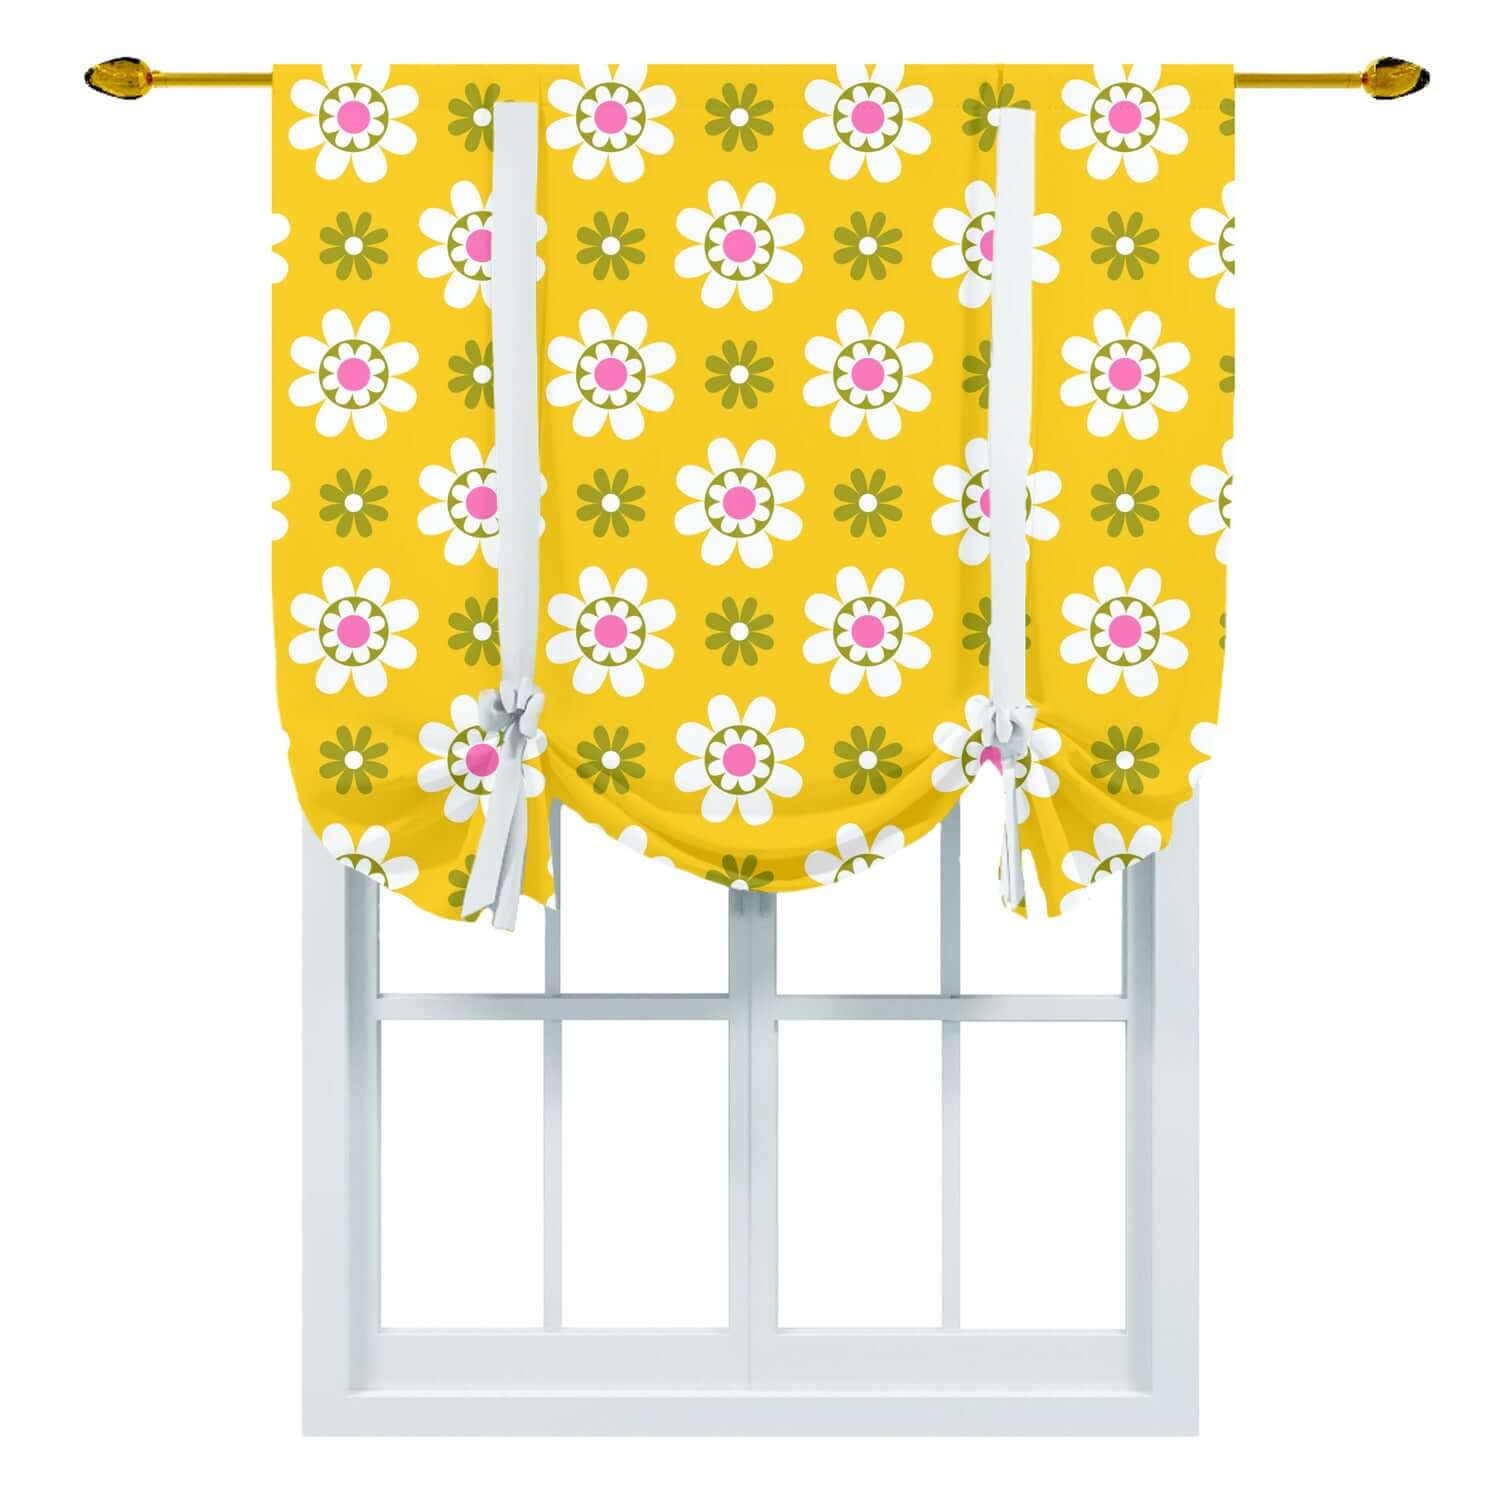 Vintage Daisy, Mid Mod Yellow, Pink, Green MCM Tie Up Curtain Curtains